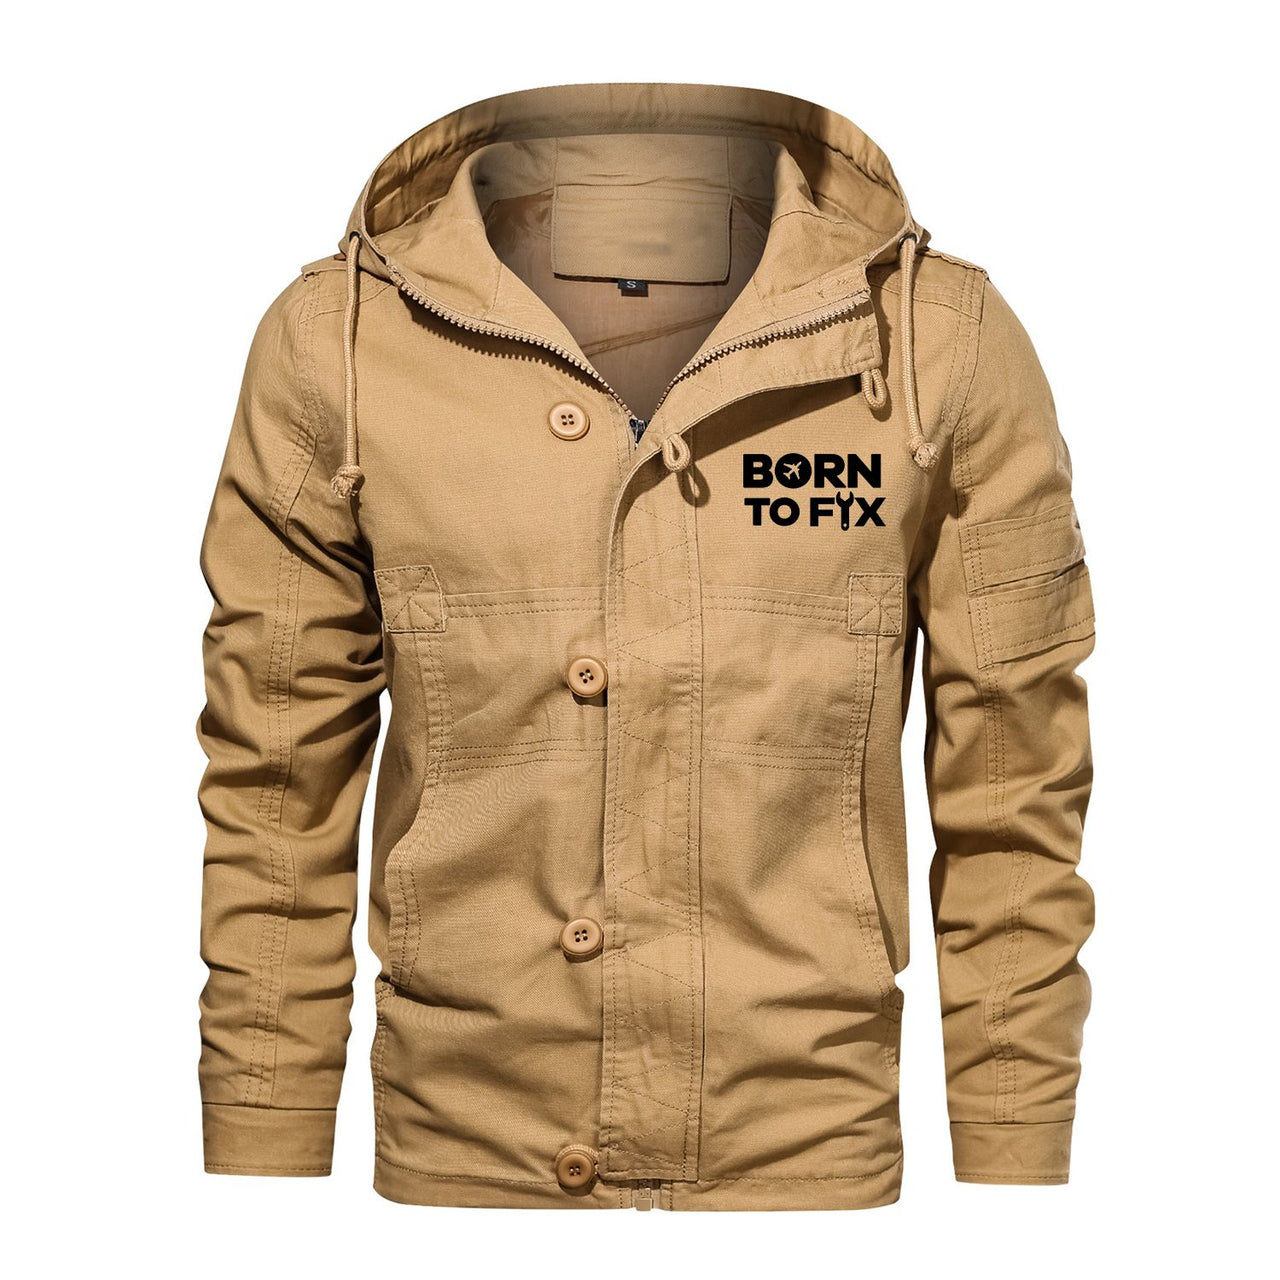 Born To Fix Airplanes Designed Cotton Jackets